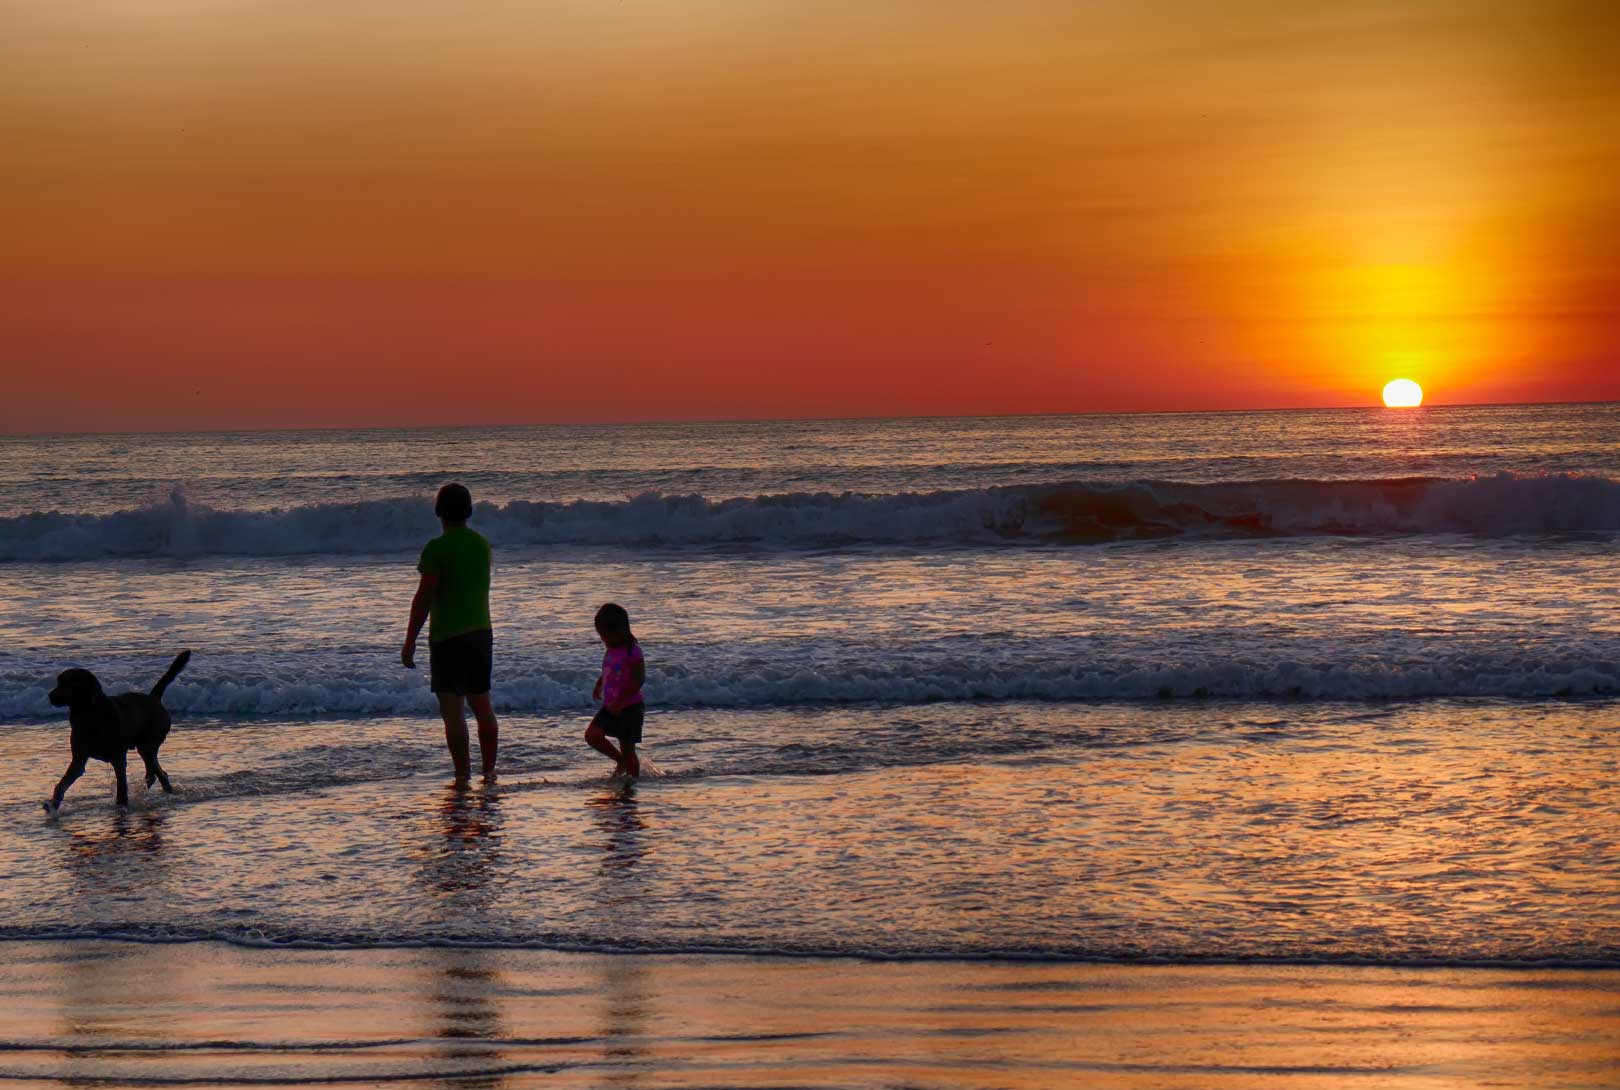 A Father Child & Dog On The Beach At Sunset In Puerto Lopez